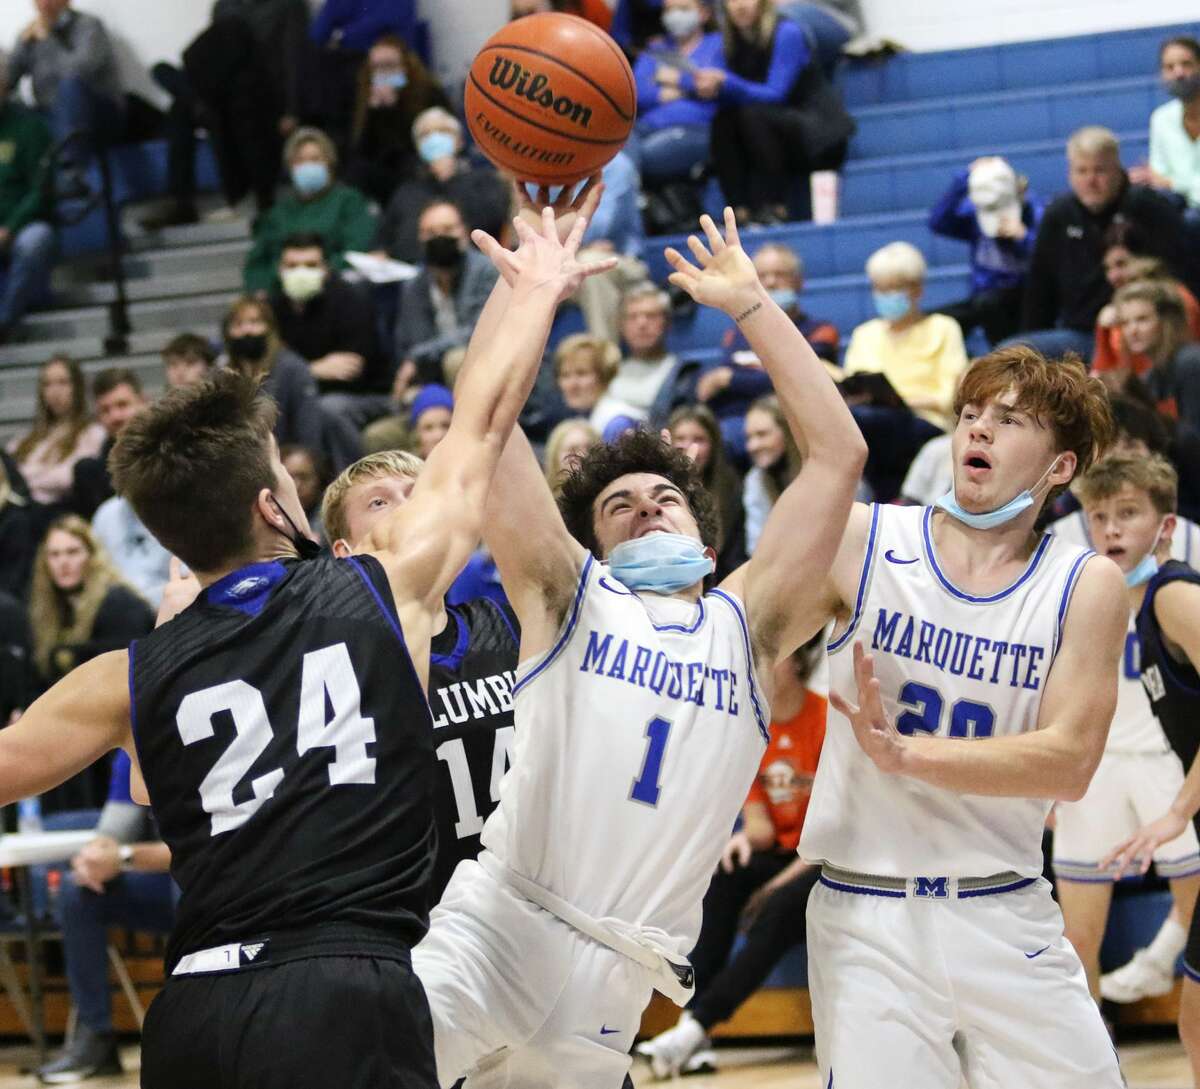 Marquette Catholic's Parker Macias (1) scores while drawing the foul from Columbia's Dylan Murphy (24) while the Explorers' Brody Hendricks watches the play in the title game of the Columbia-Freeburg Tournament last Wednesday in Columbia.